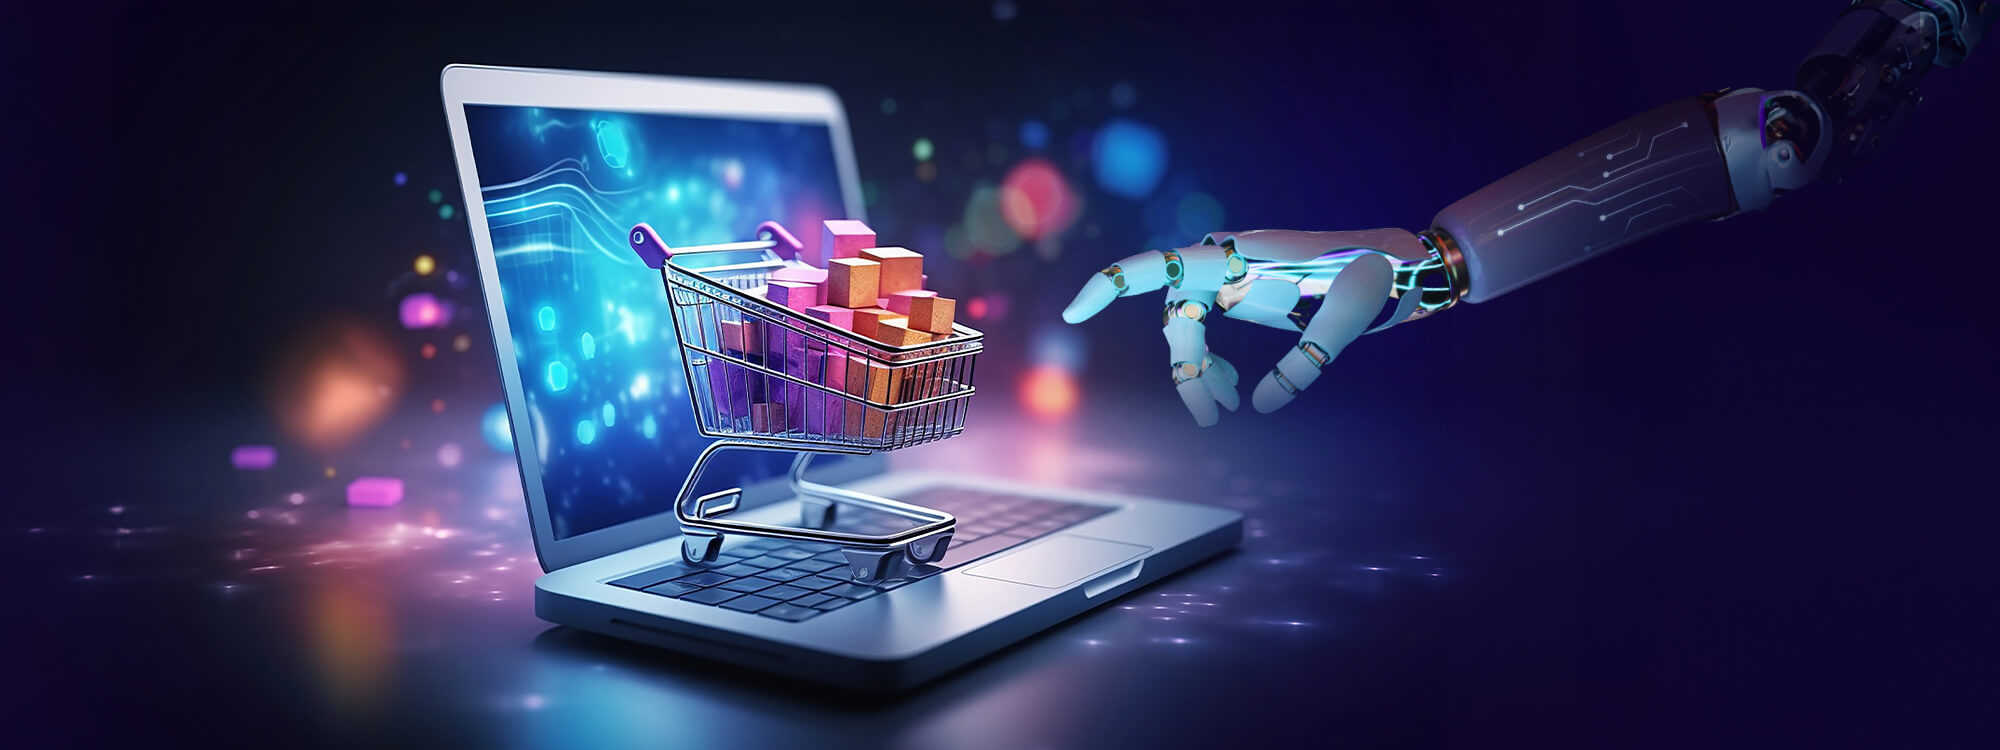 AI promises to reshape retail, but it's still in development with much to learn.